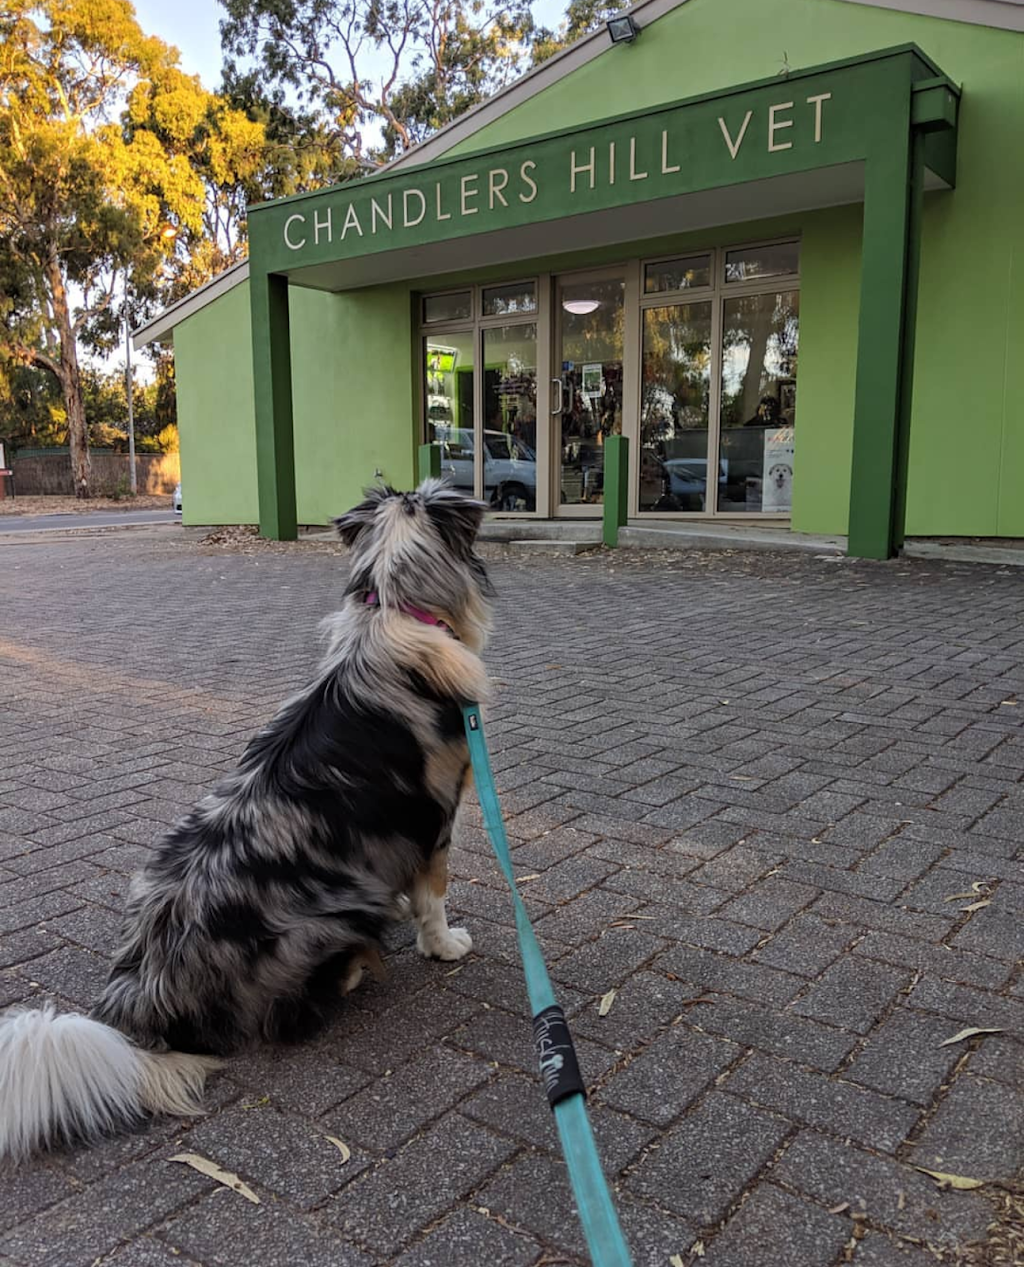 Chandlers Hill Vet | 190 Chandlers Hill Rd, Happy Valley SA 5159, Australia | Phone: (08) 8322 2090